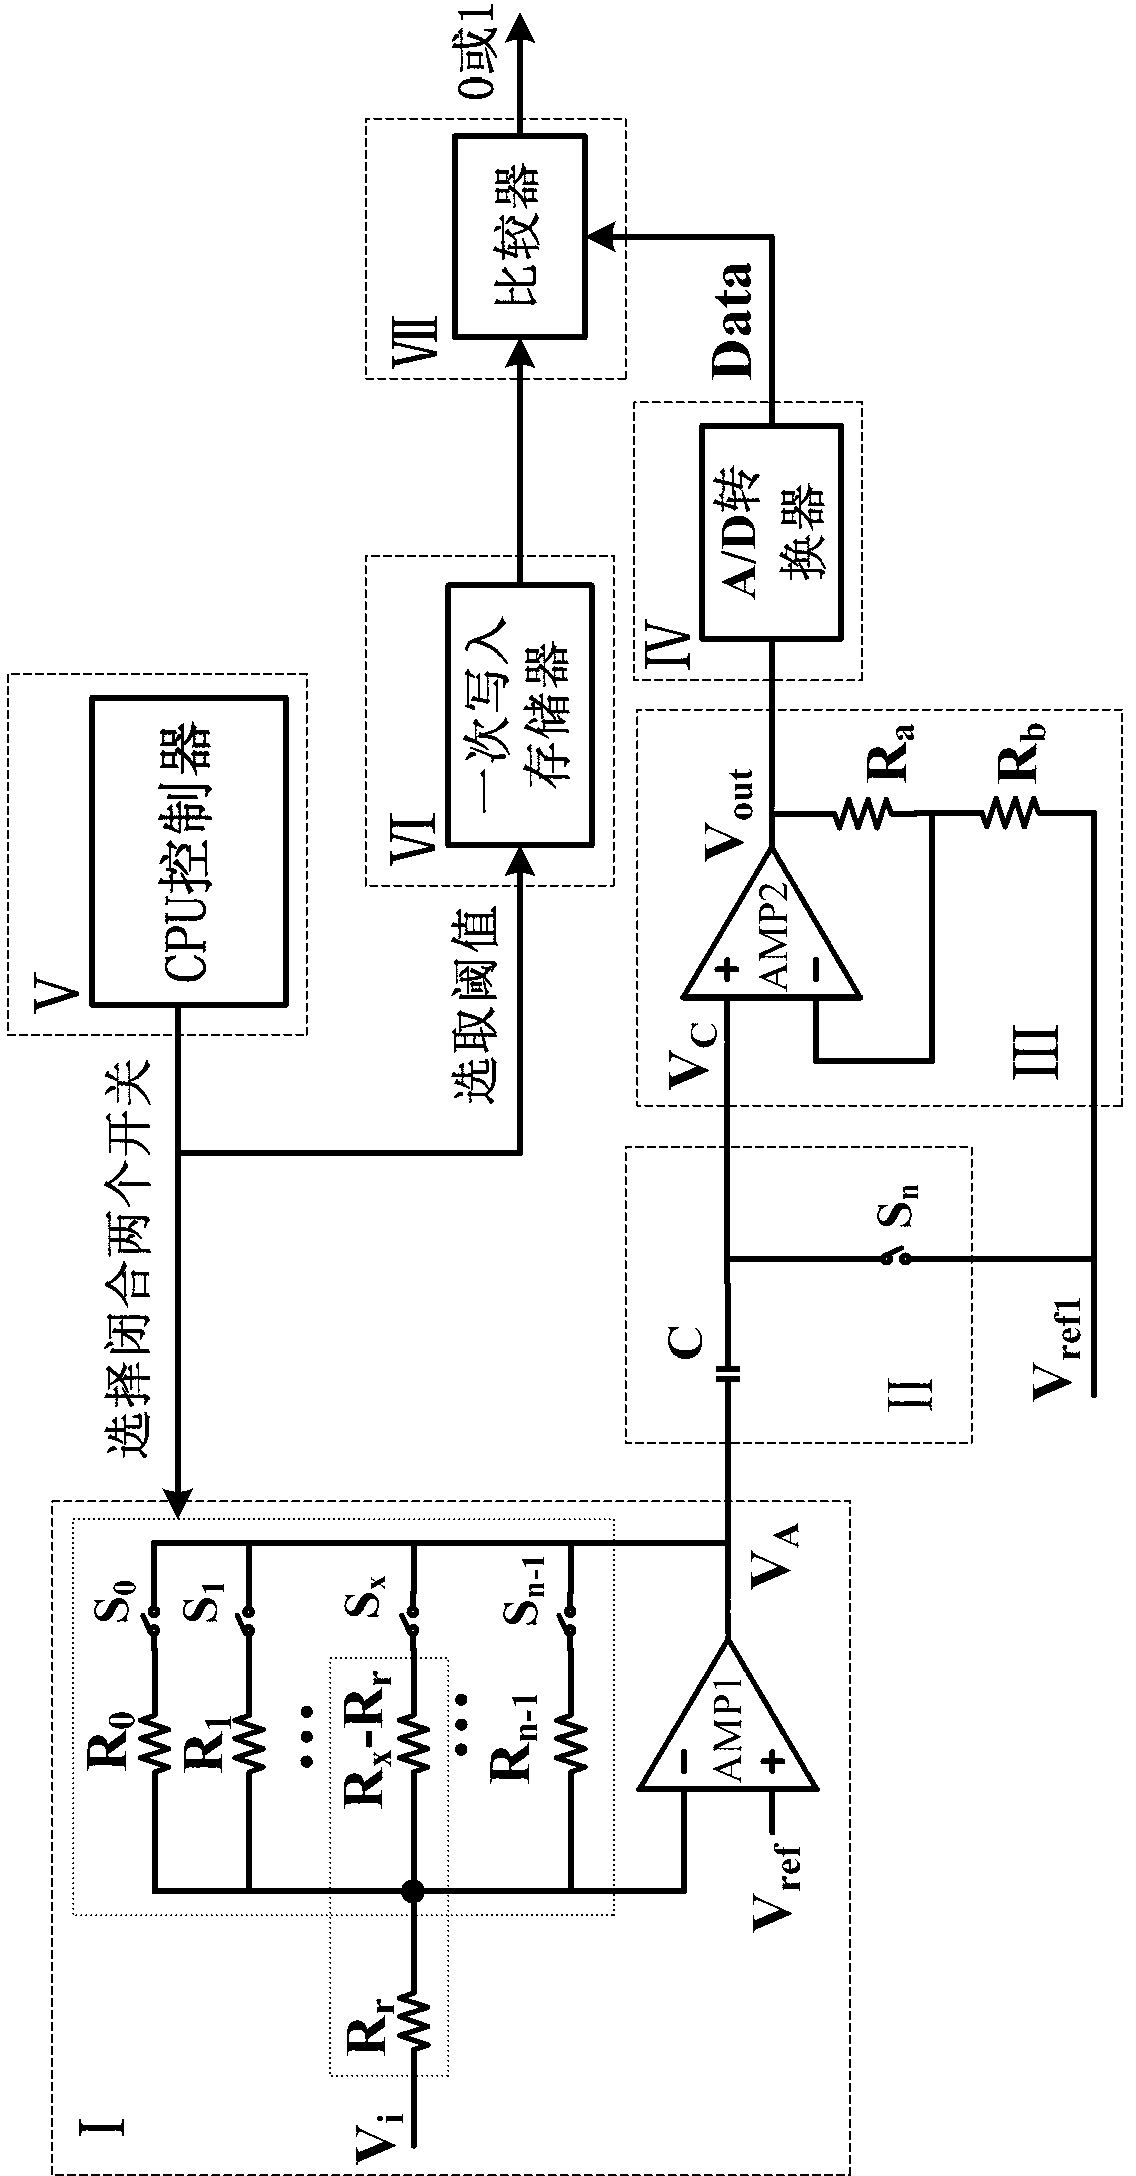 Detection circuit of active shielding wiring